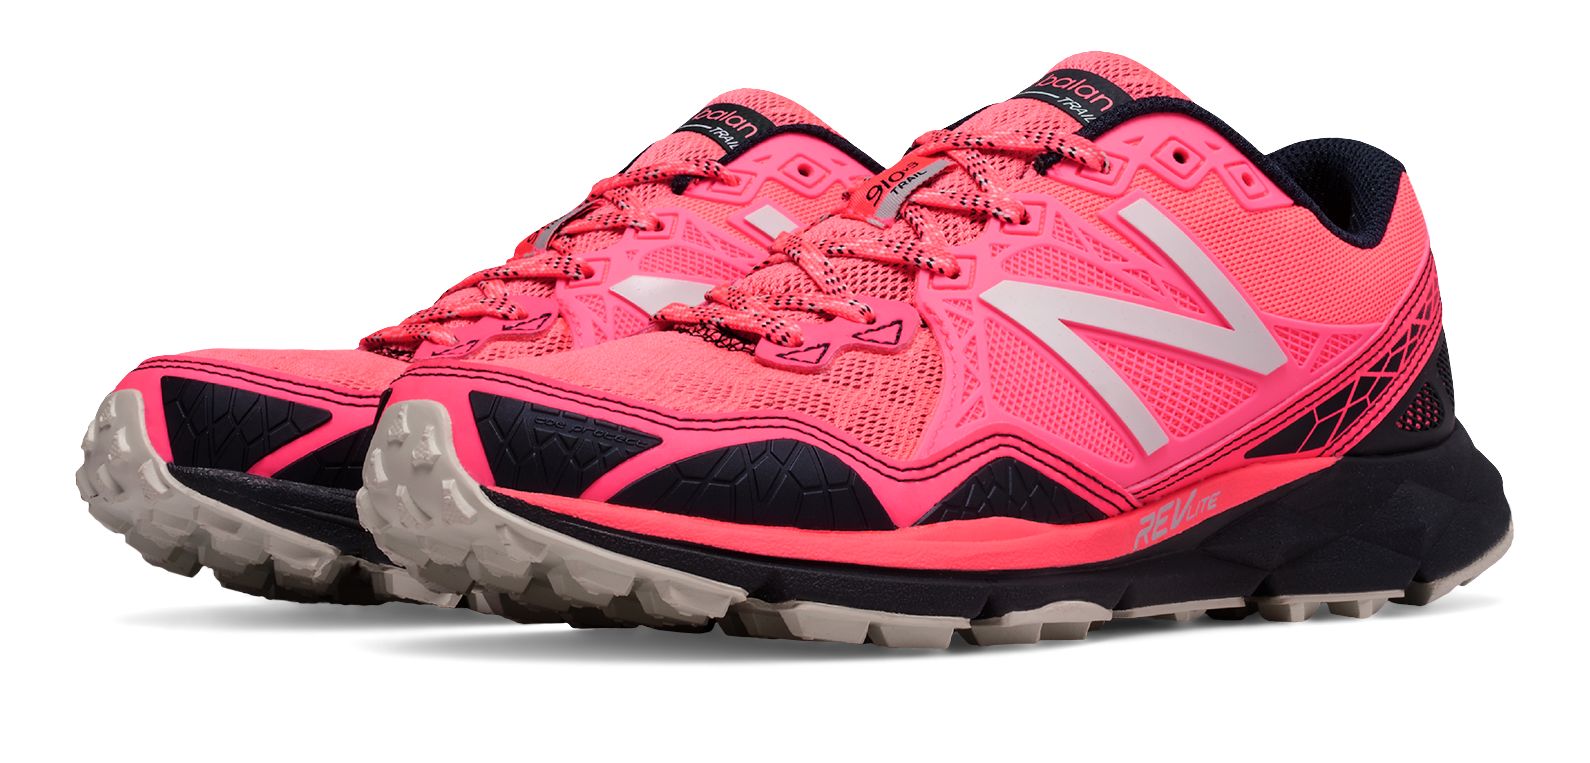 New Balance WT910-V3 on Sale - Discounts Up to 56% Off on WT910GR3 at Joe's New  Balance Outlet